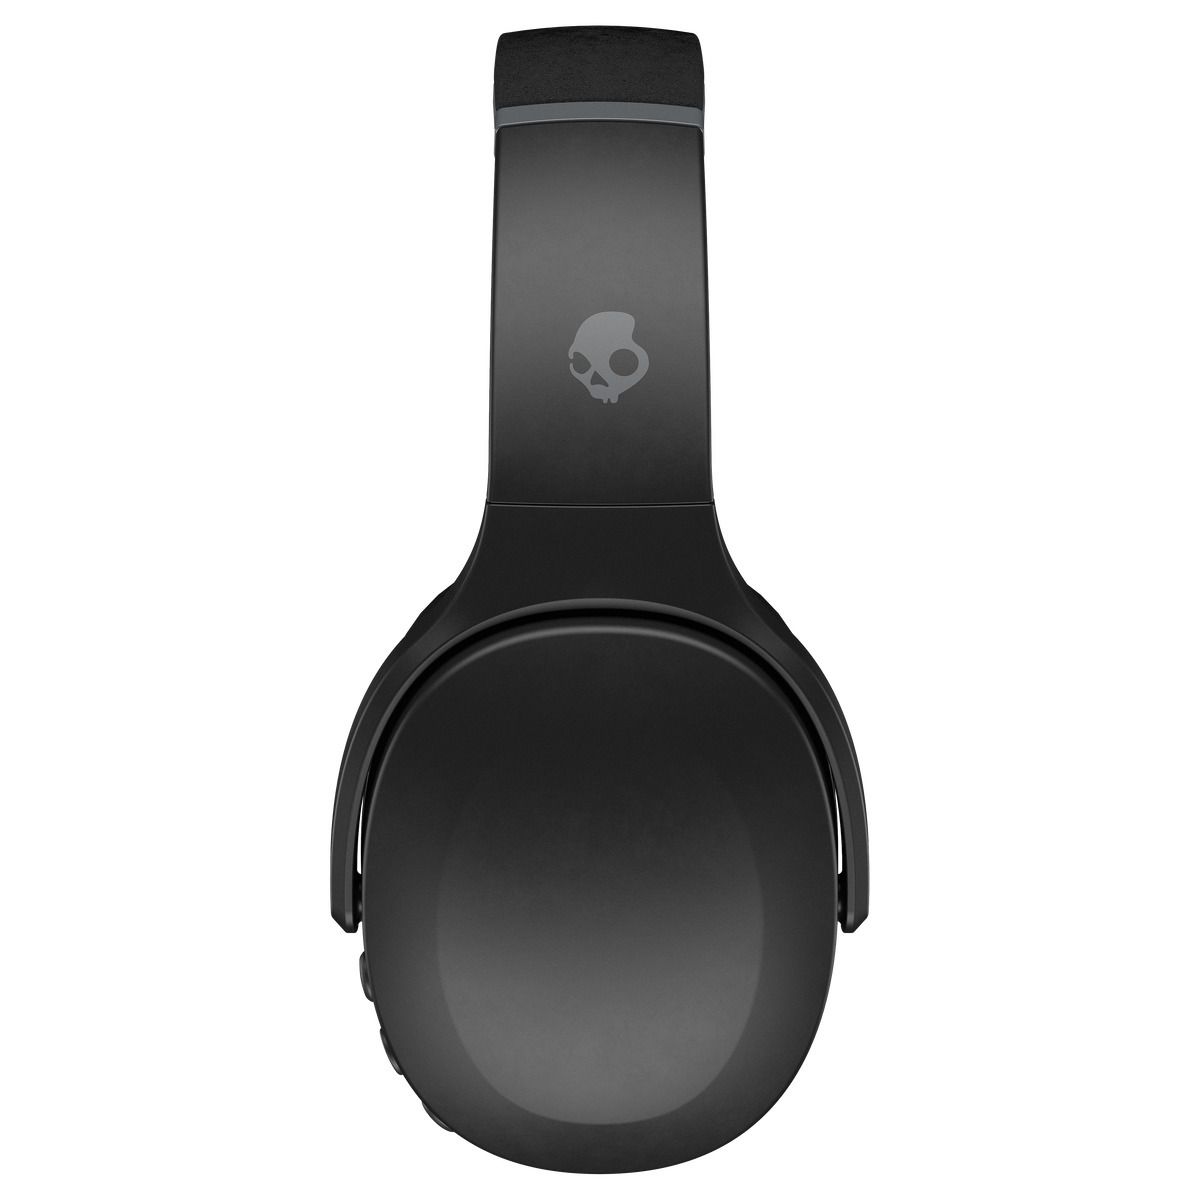 Skullcandy Crusher Evo Wireless Over-Ear-Headphone with Rapid Charge Personal Sound App and Built-in Tile Finding Technology with mic (Black)